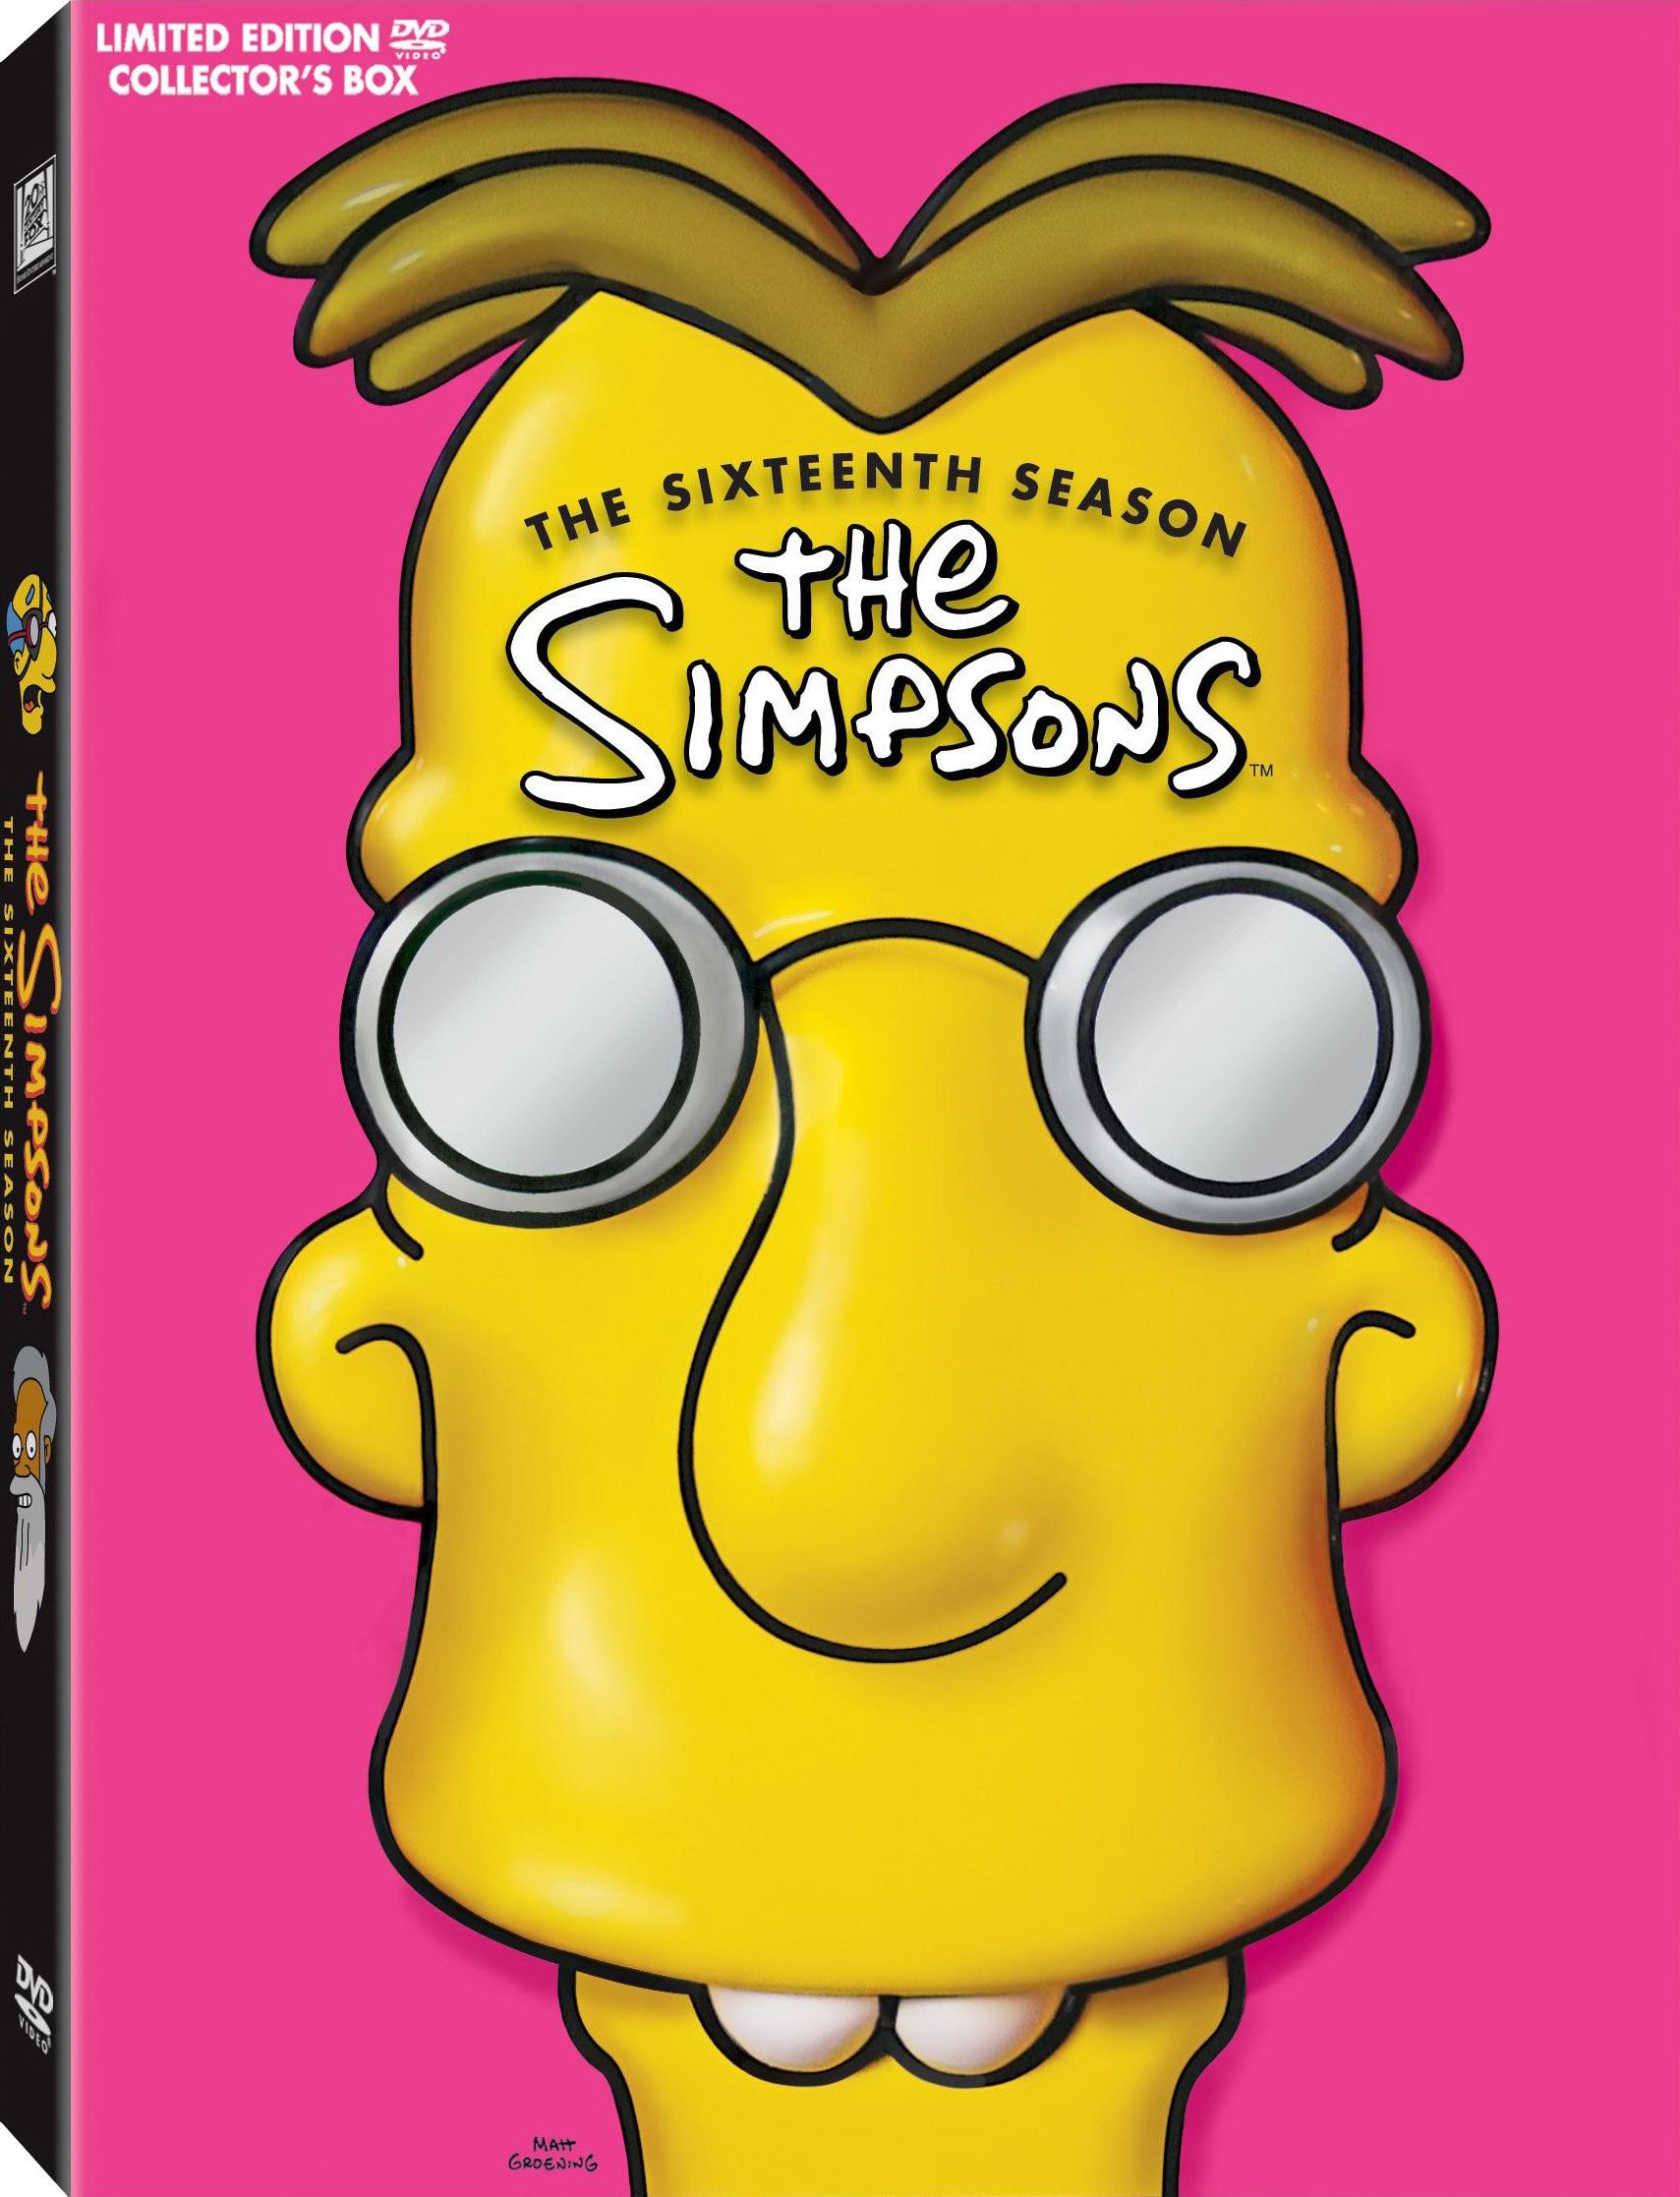 The Simpsons Dvd Release Date